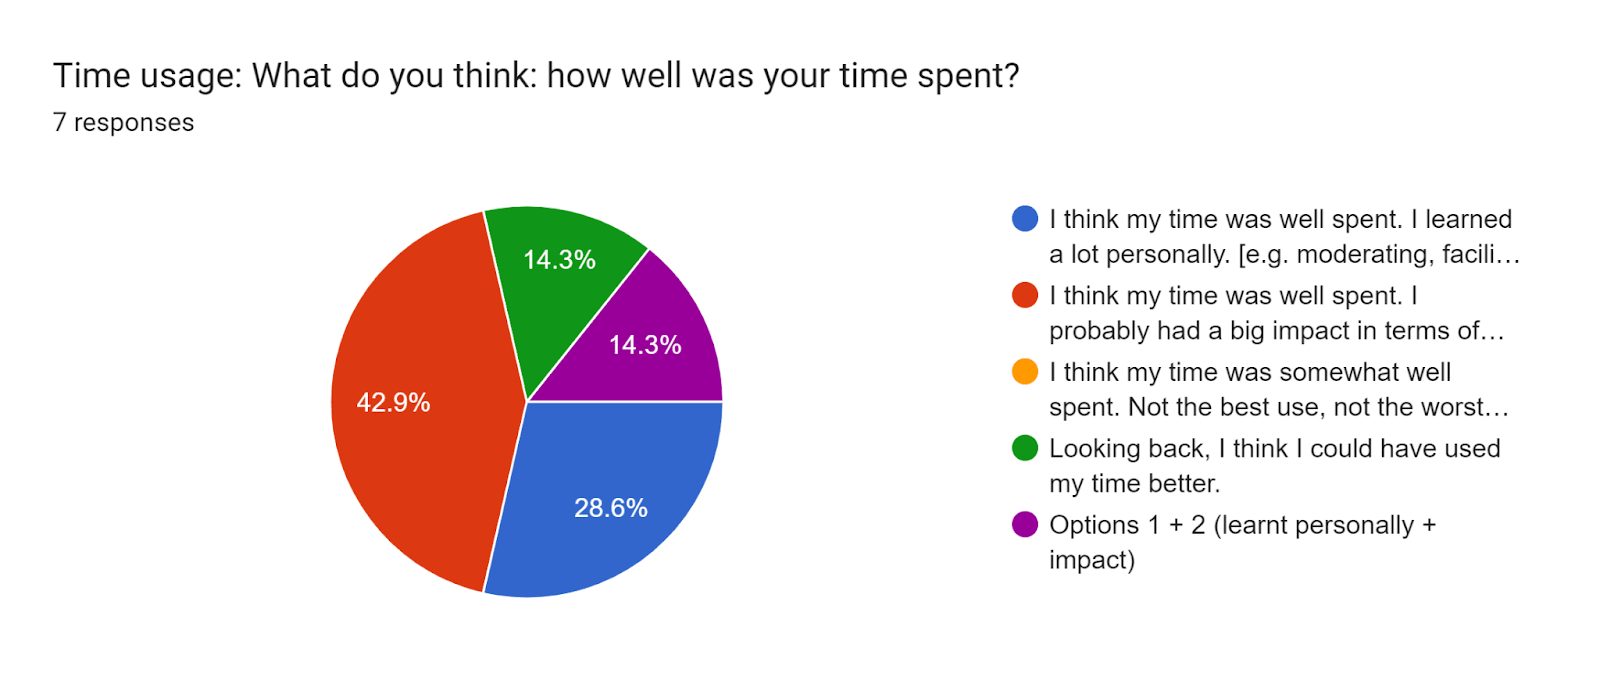 Forms response chart. Question title: Time usage: What do you think: how well was your time spent?. Number of responses: 7 responses.